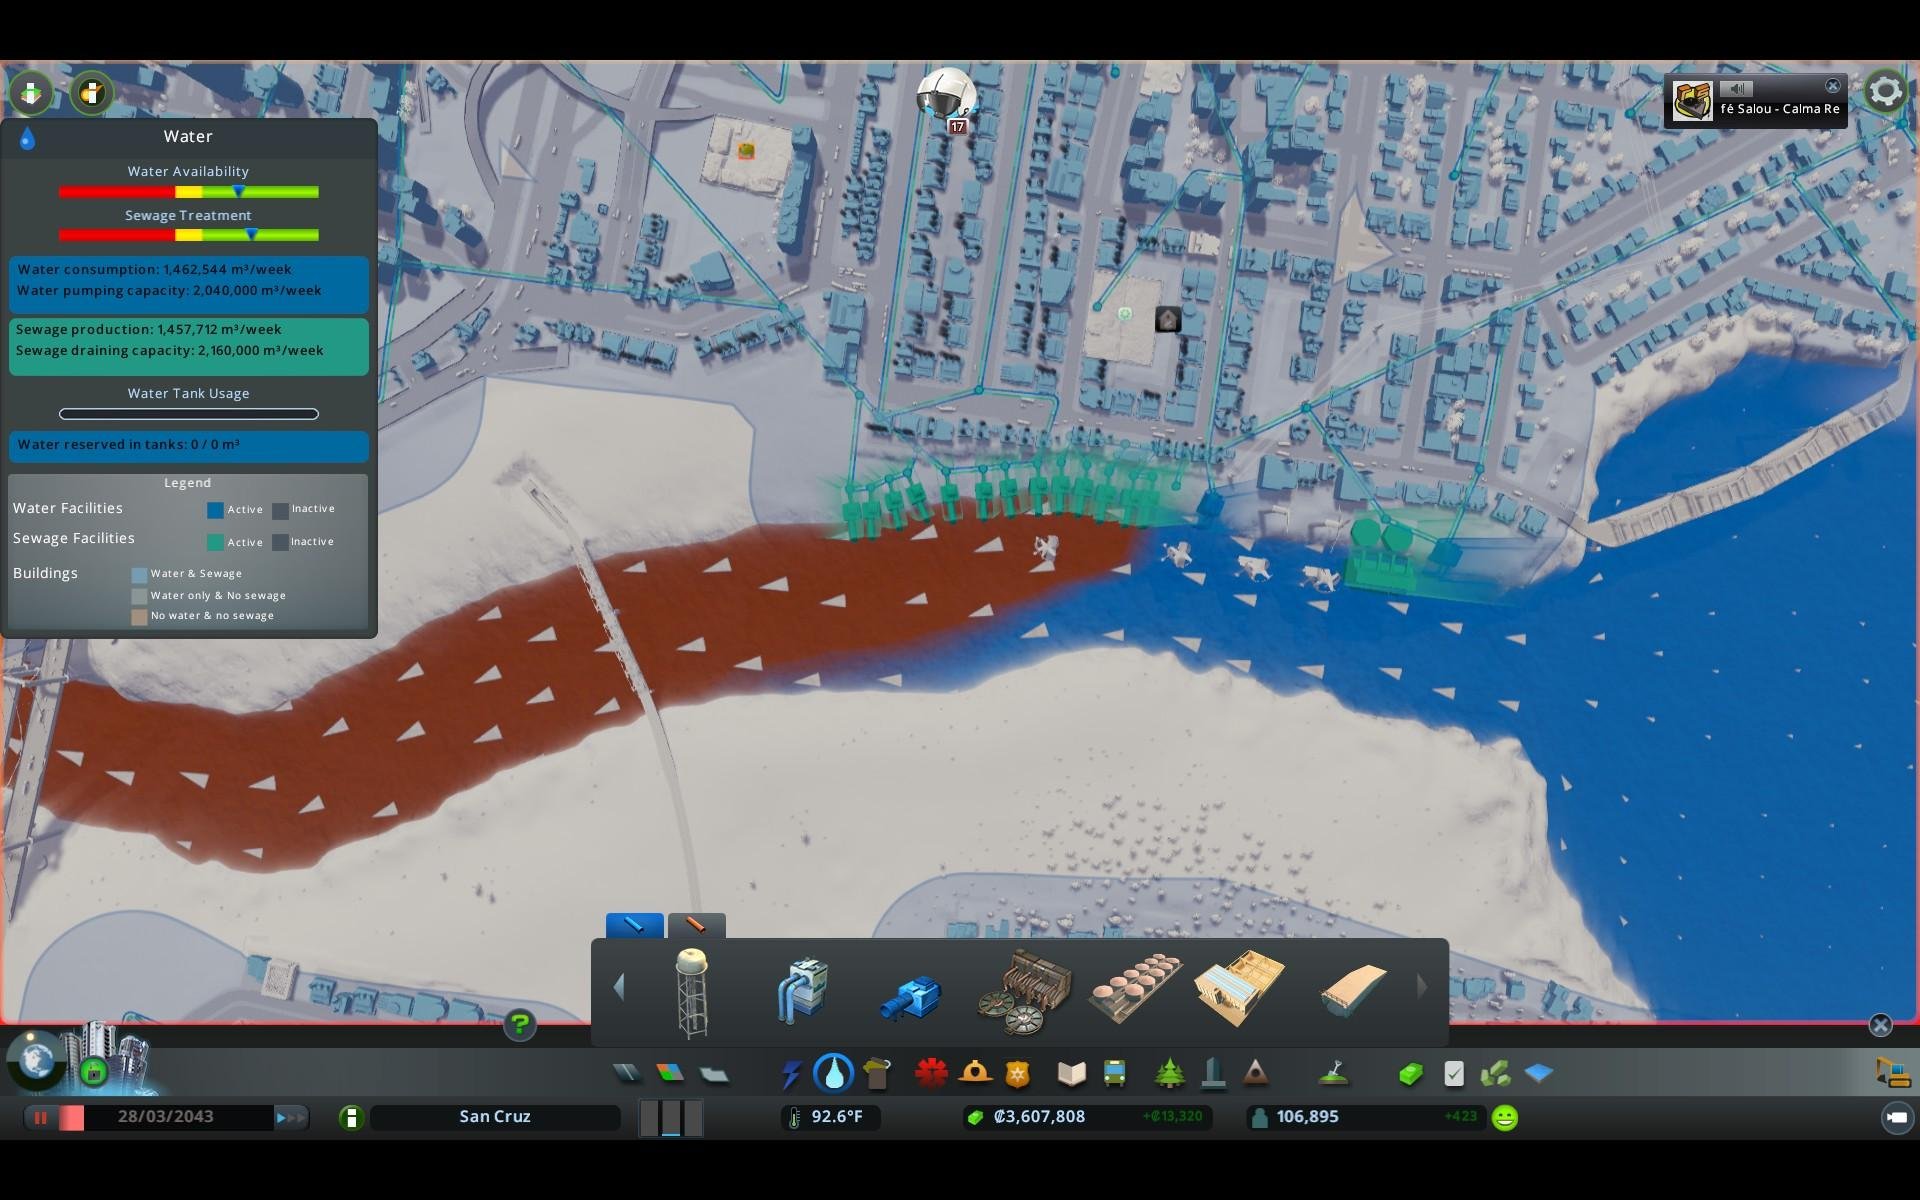 cities skylines xbox one traffic manager